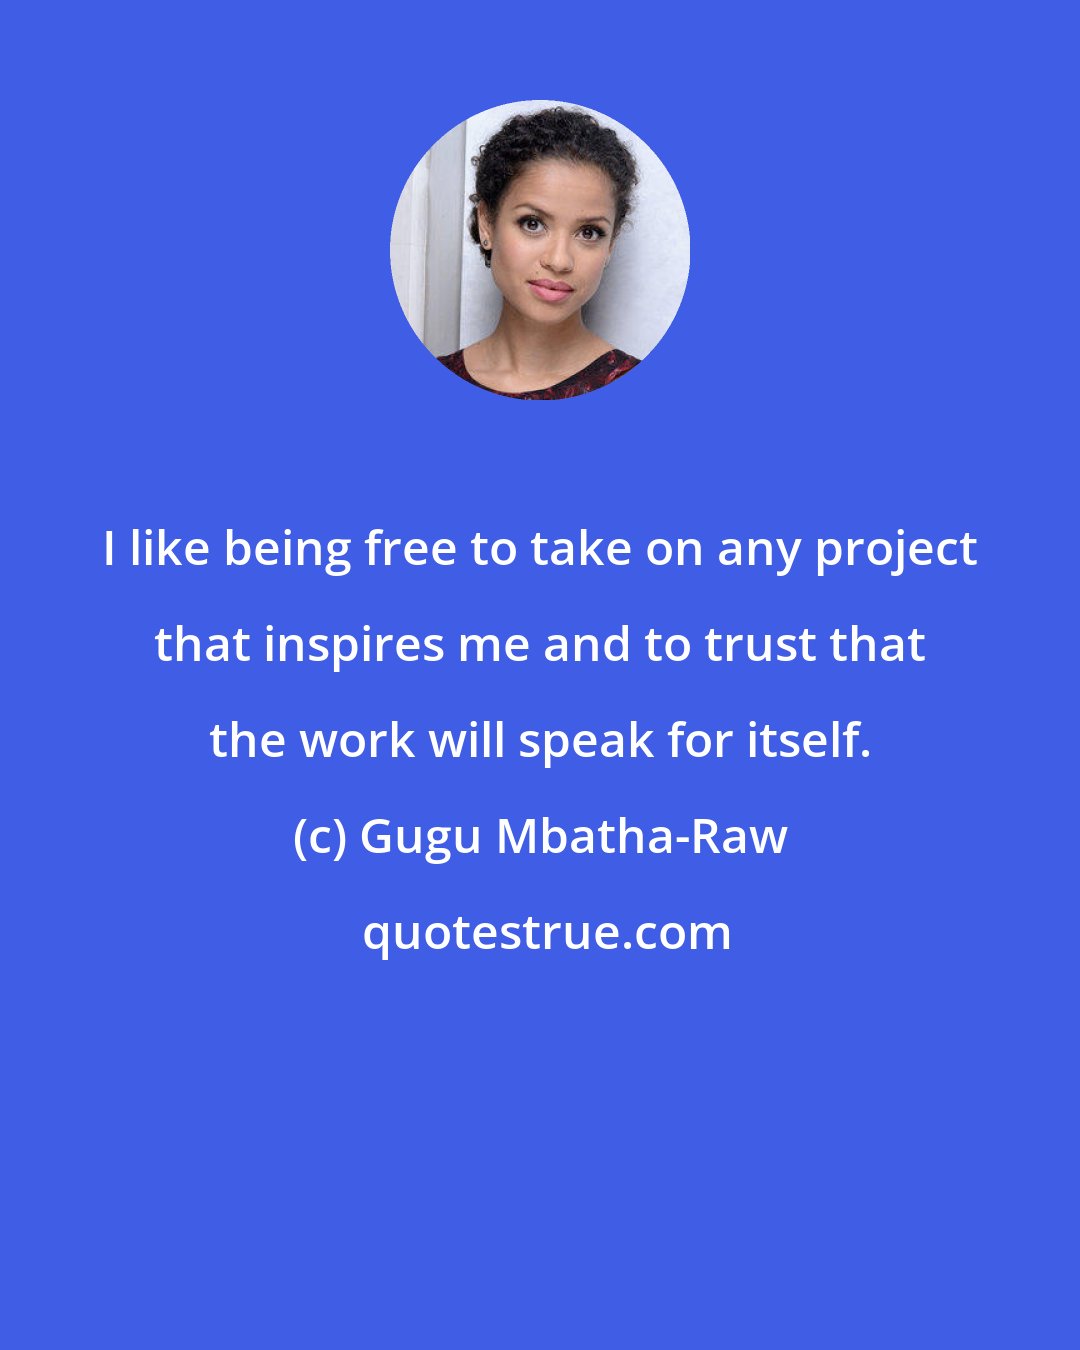 Gugu Mbatha-Raw: I like being free to take on any project that inspires me and to trust that the work will speak for itself.